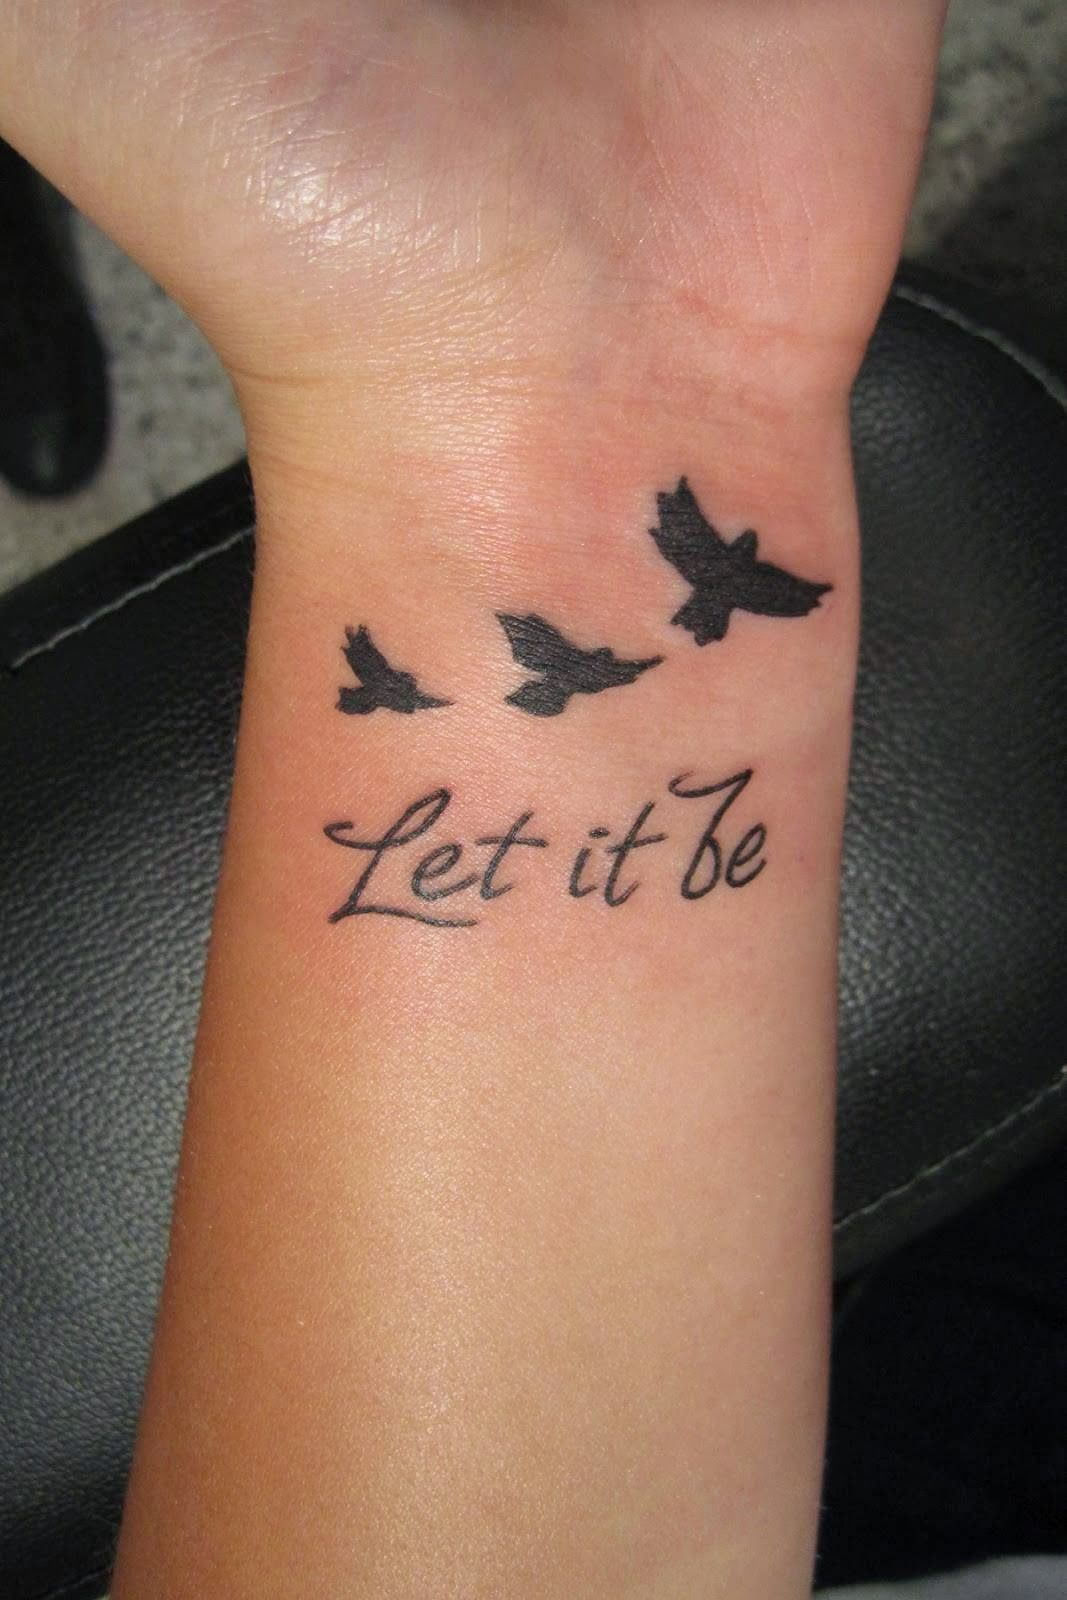 Let It Be Writing And Flying Birds Tattoo On Wrist Tattoo Mania intended for measurements 1067 X 1600